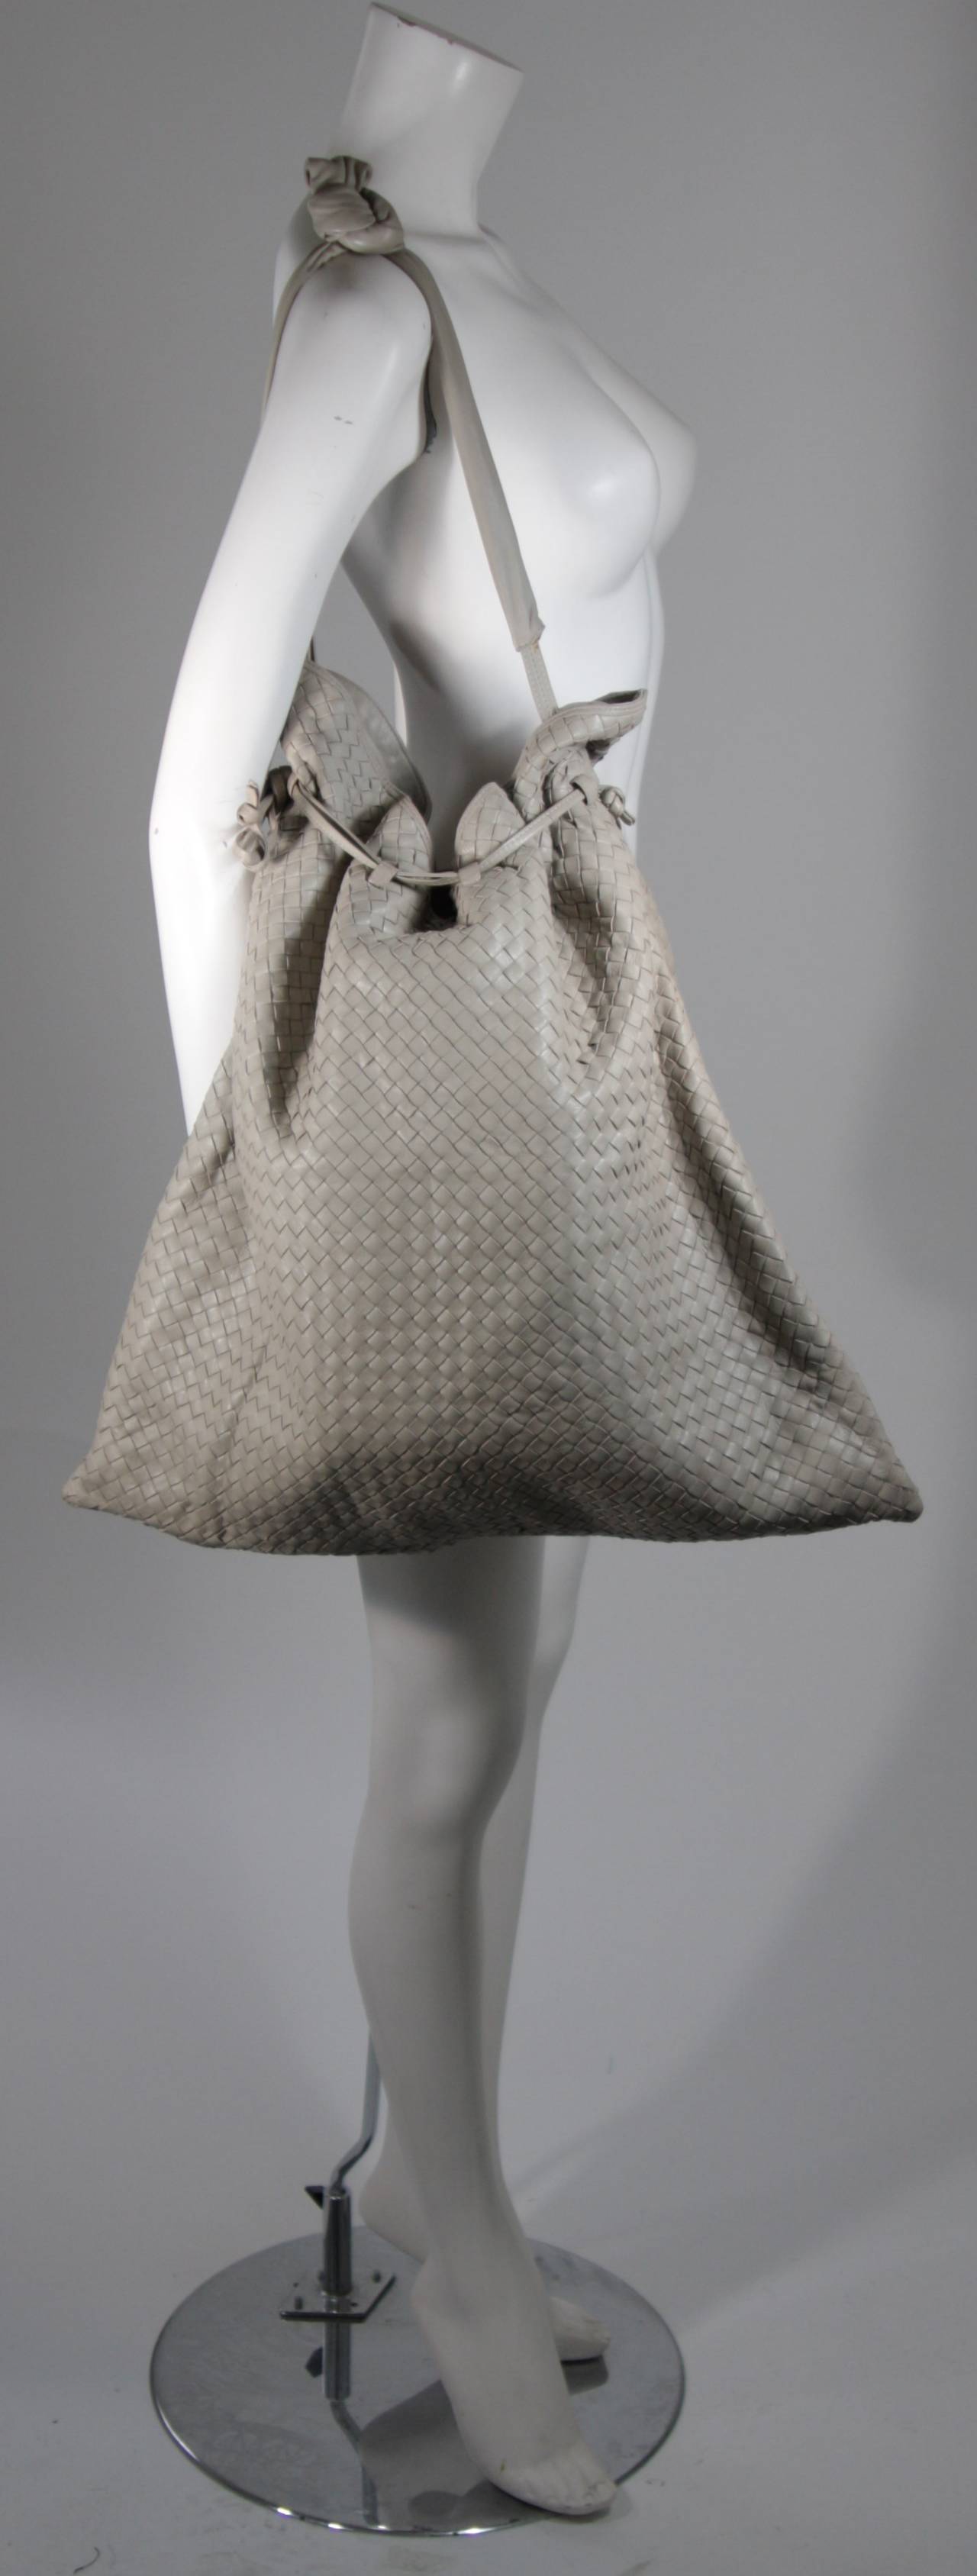 This vintage Bottega Veneta is available for viewing at our Beverly Hills Boutique. We offer a large selection of evening gowns and luxury garments.

This handbag is composed of a supple taupe leather in the classic Bottega Veneta interwoven